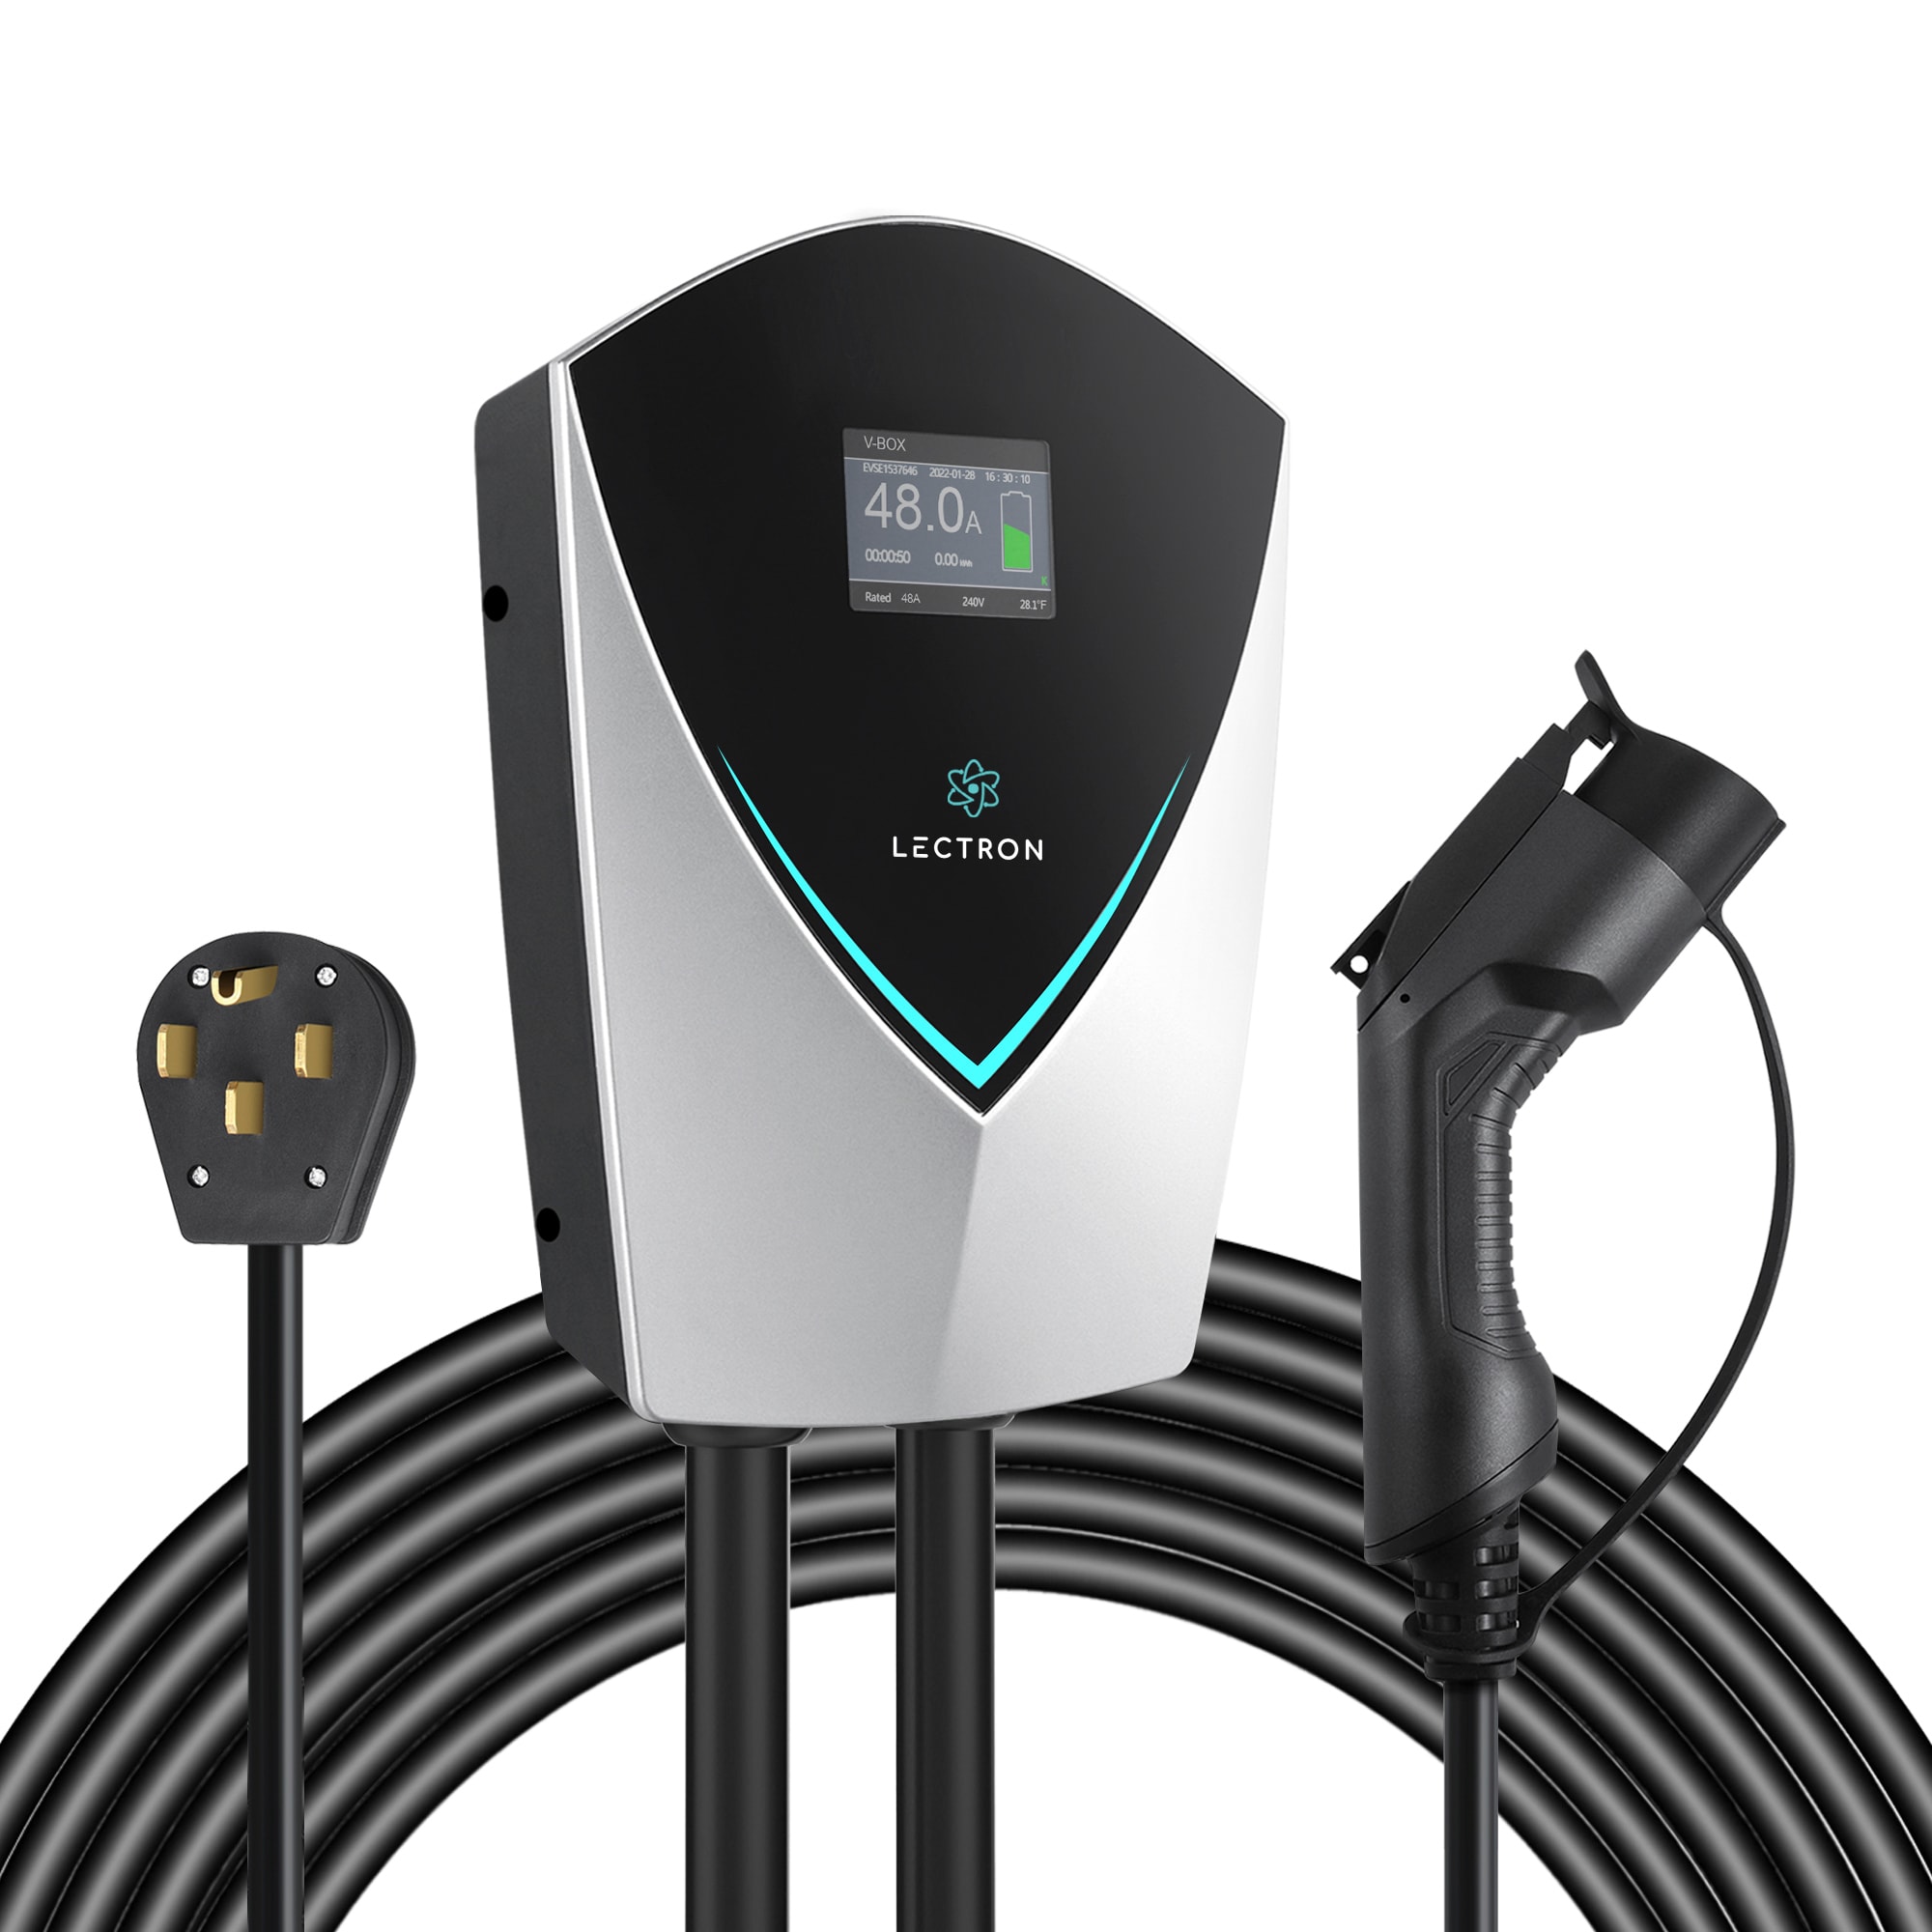 Lectron V-Box EV ChargeR-EnergyStar and ETL certified Level 48 Amps/ EV  Electric Vehicle Charging Station with 20-ft Cable in the Electric Car  Chargers department at